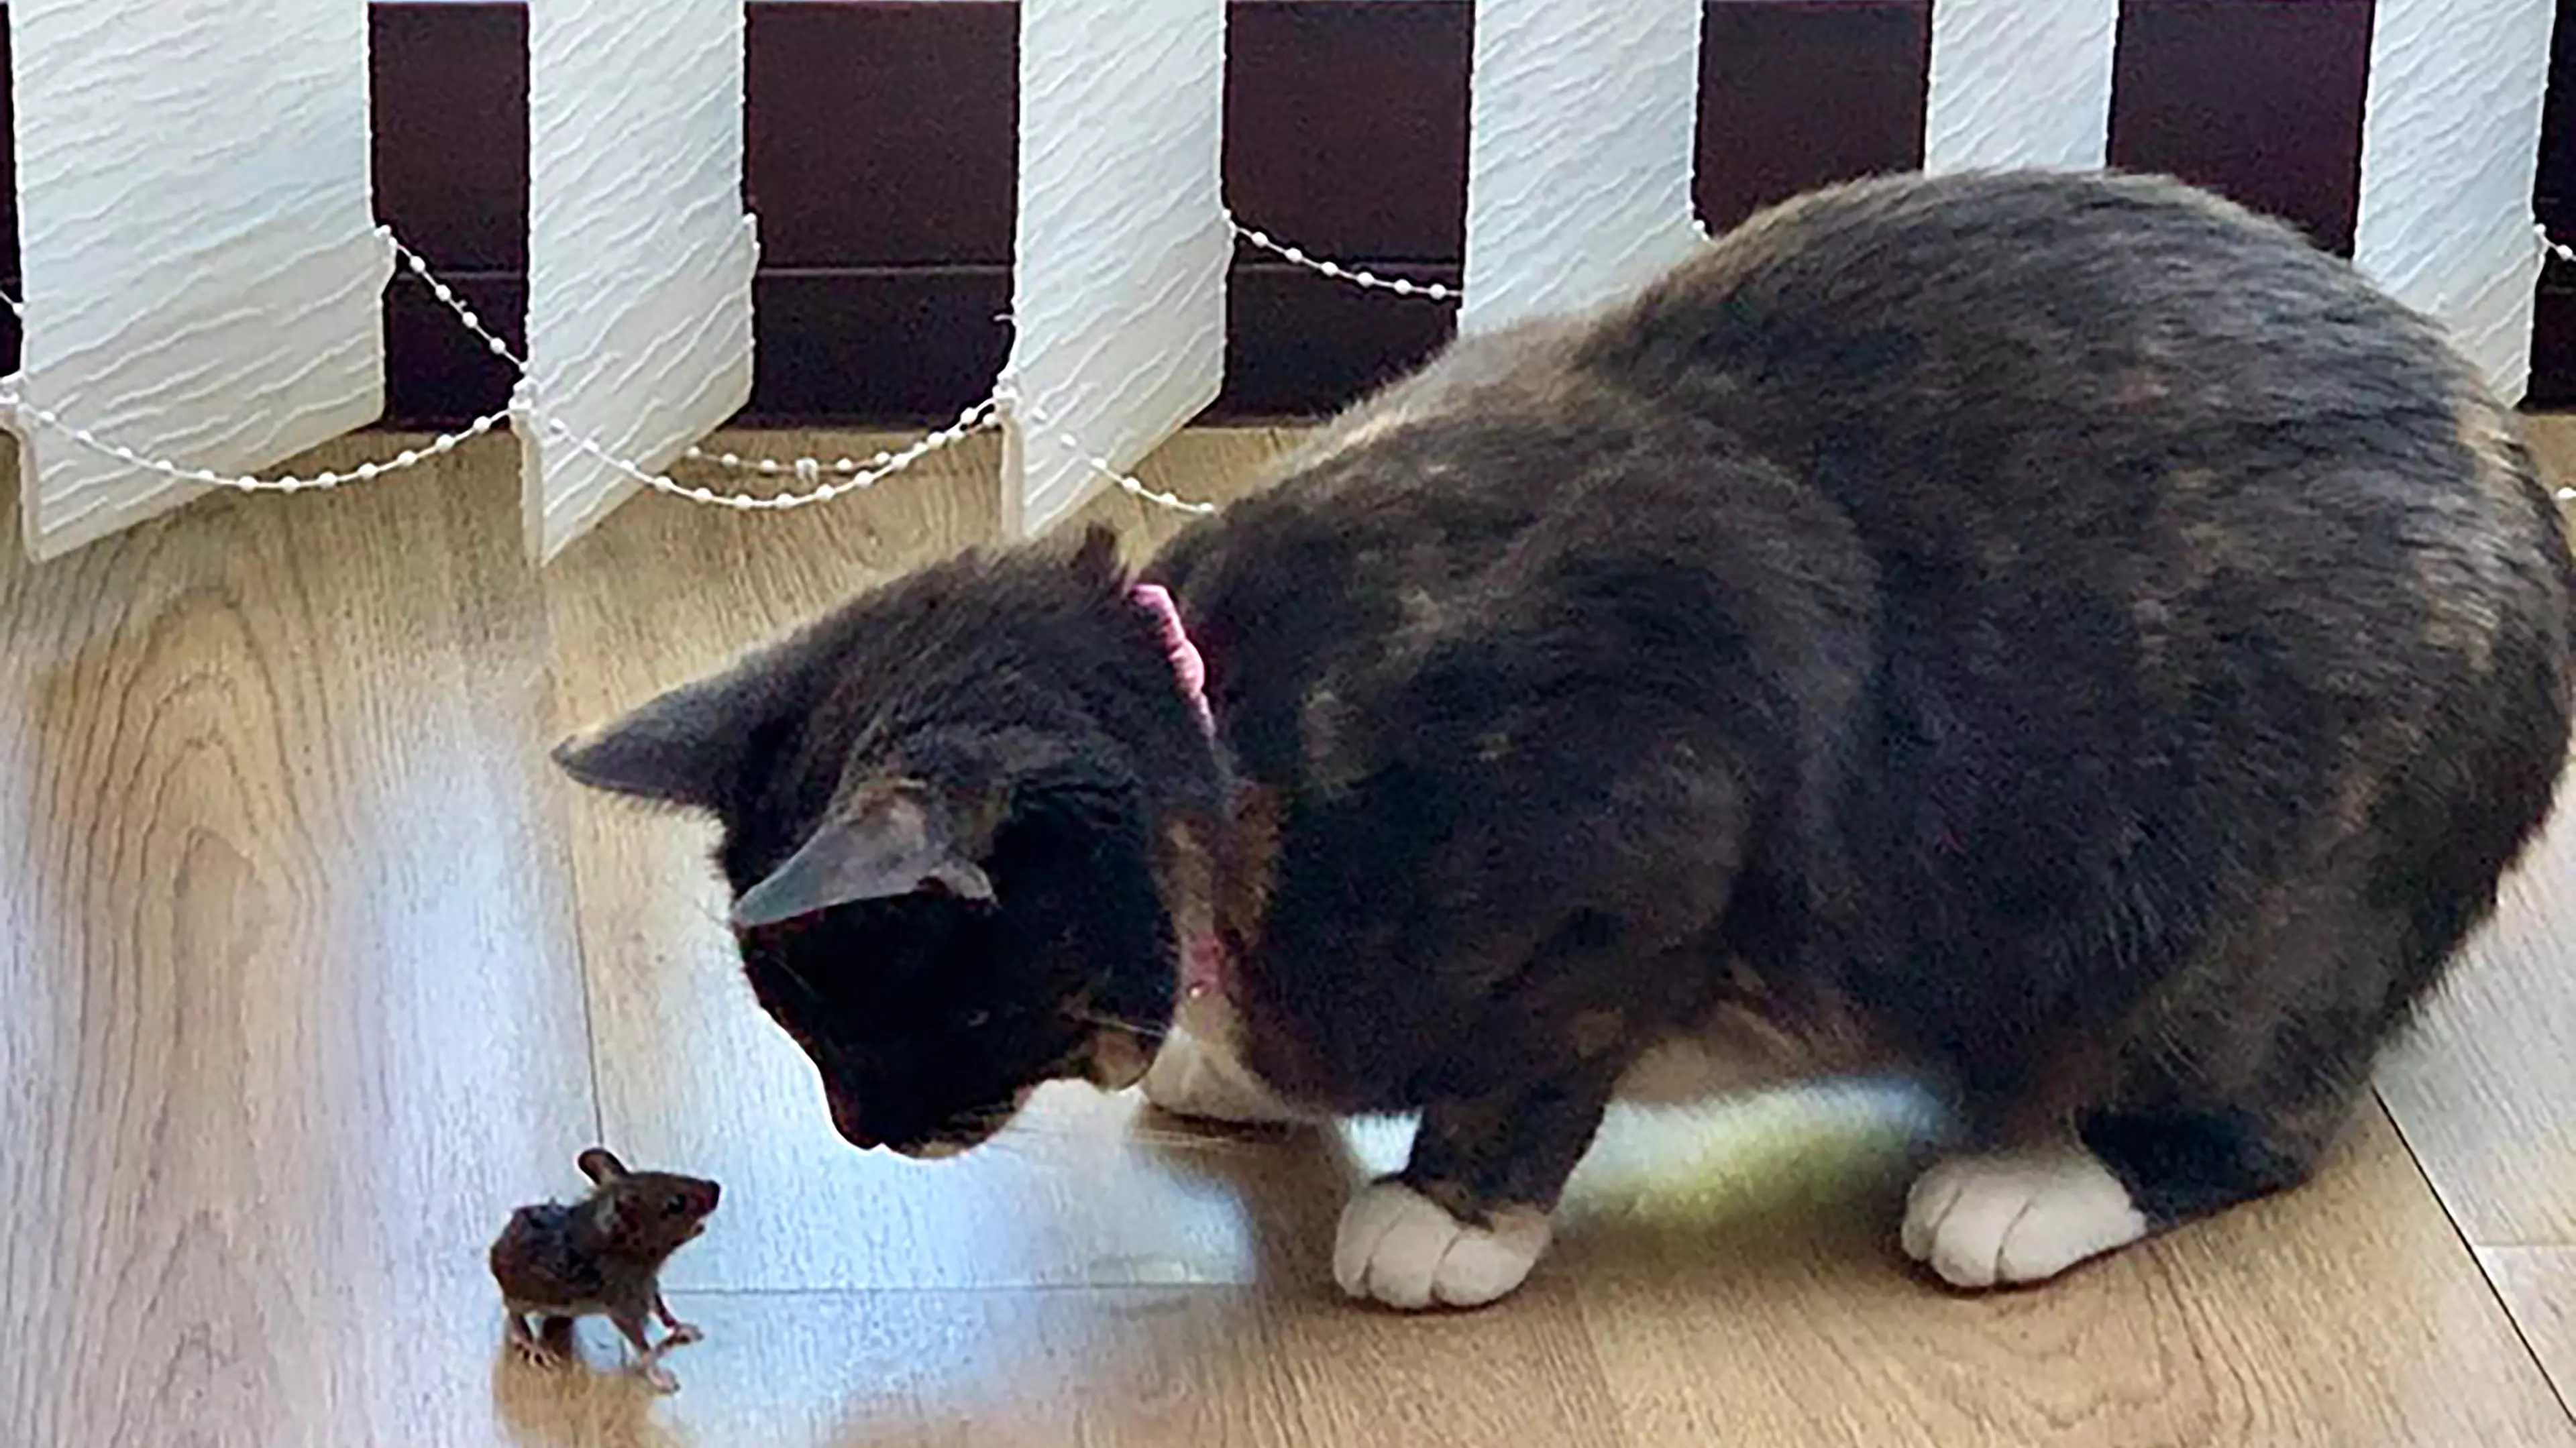 A Brave Mouse Stood Up To A Cat In A True 'Stuart Little Moment'